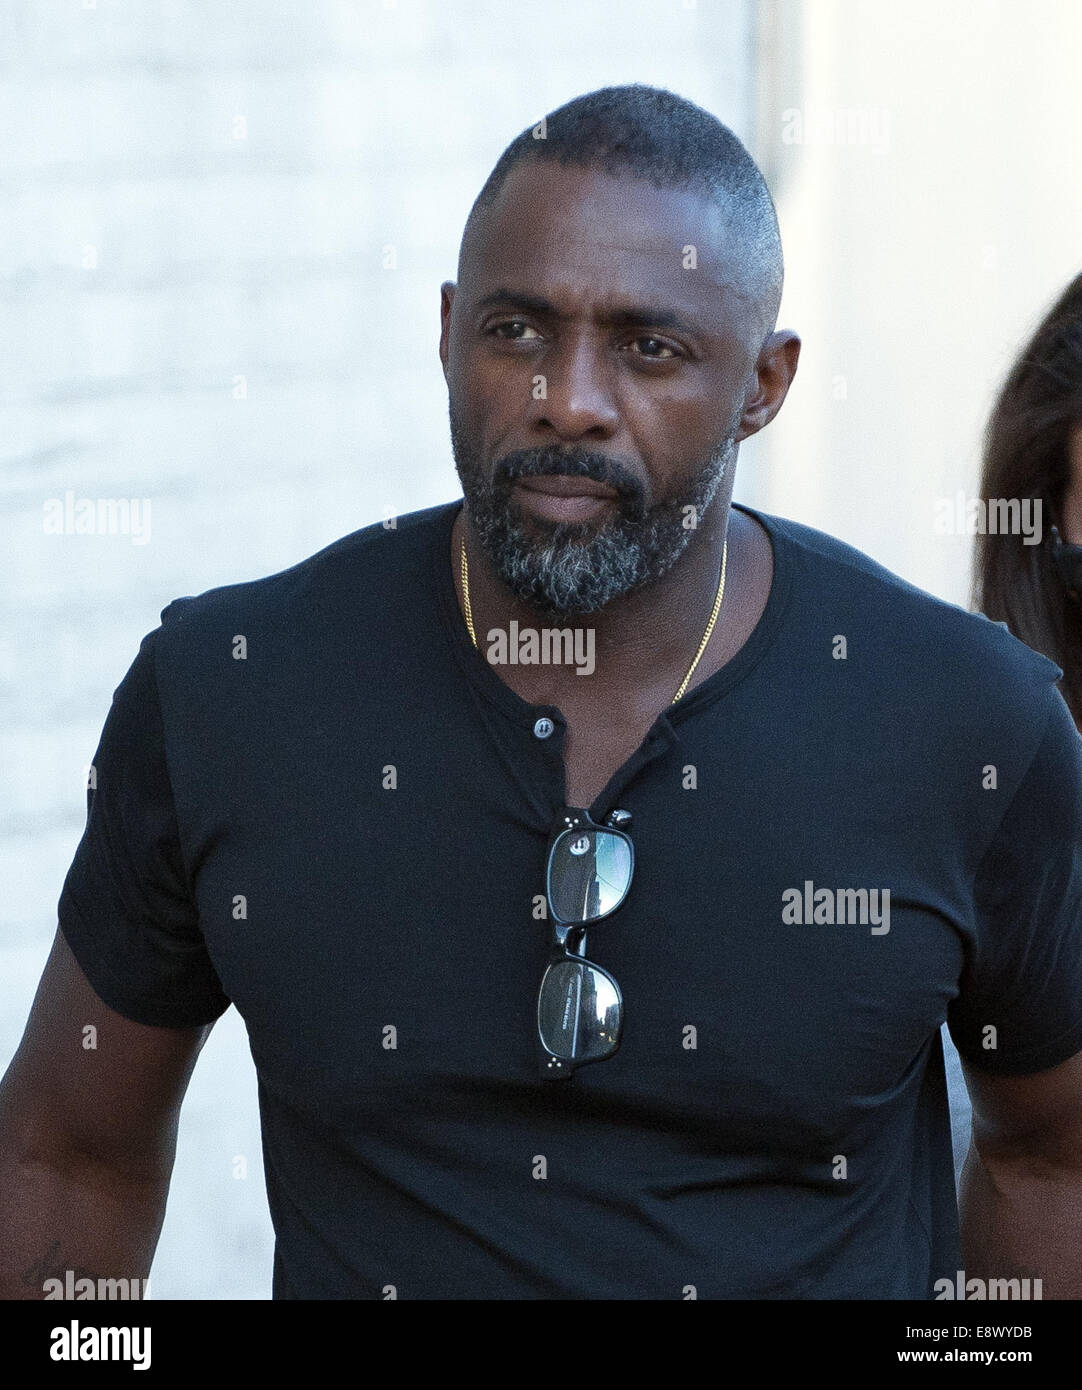 Hollywood, California, USA. 26th Aug, 2014. English actor, producer and DJ, Idris Elba, from the recent 'THor' movie arrives for a taping of Jimmy Kimmel Live! at the El Capitan Theatre in Hollywood on Tuesday September 26, 2014. Elba came down to fans to sign autographs and take photos before departing after the Kimmel Live! taping. © David Bro/ZUMA Wire/Alamy Live News Stock Photo